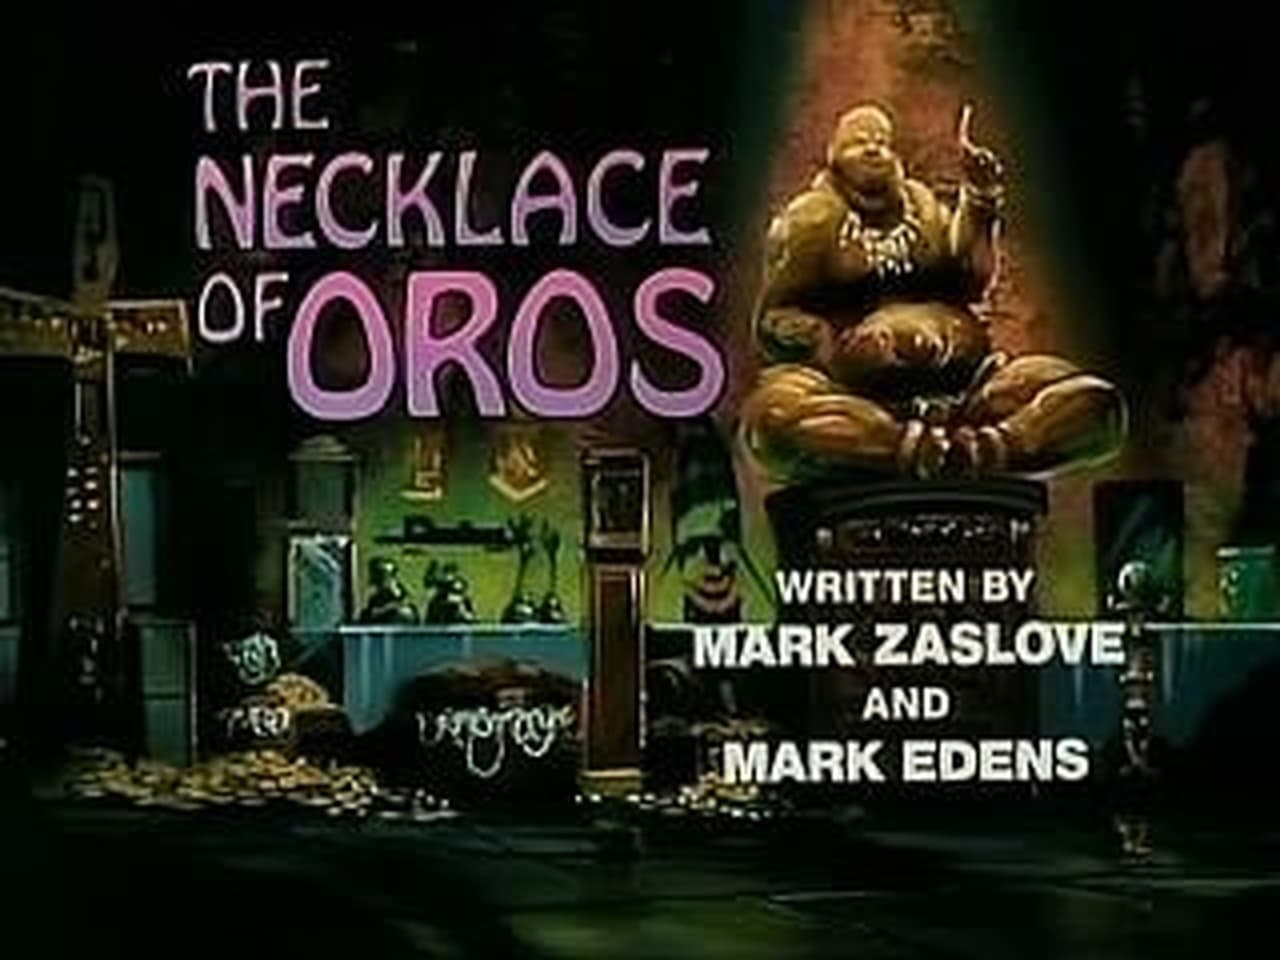 The Necklace of Oros